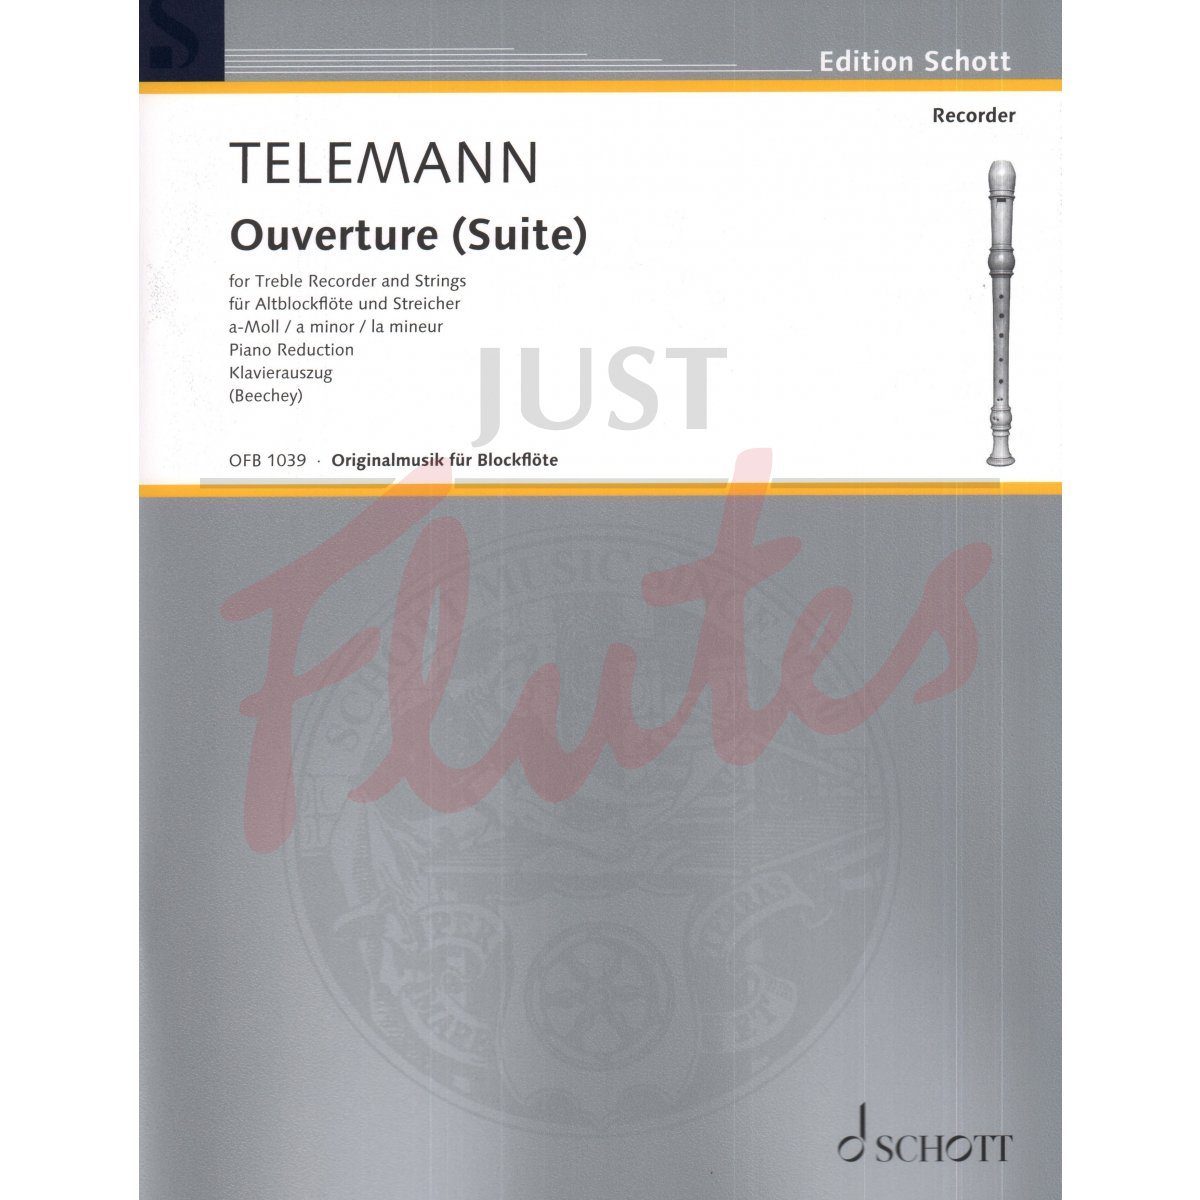 Overture (Suite) in A minor for Treble Recorder and Piano